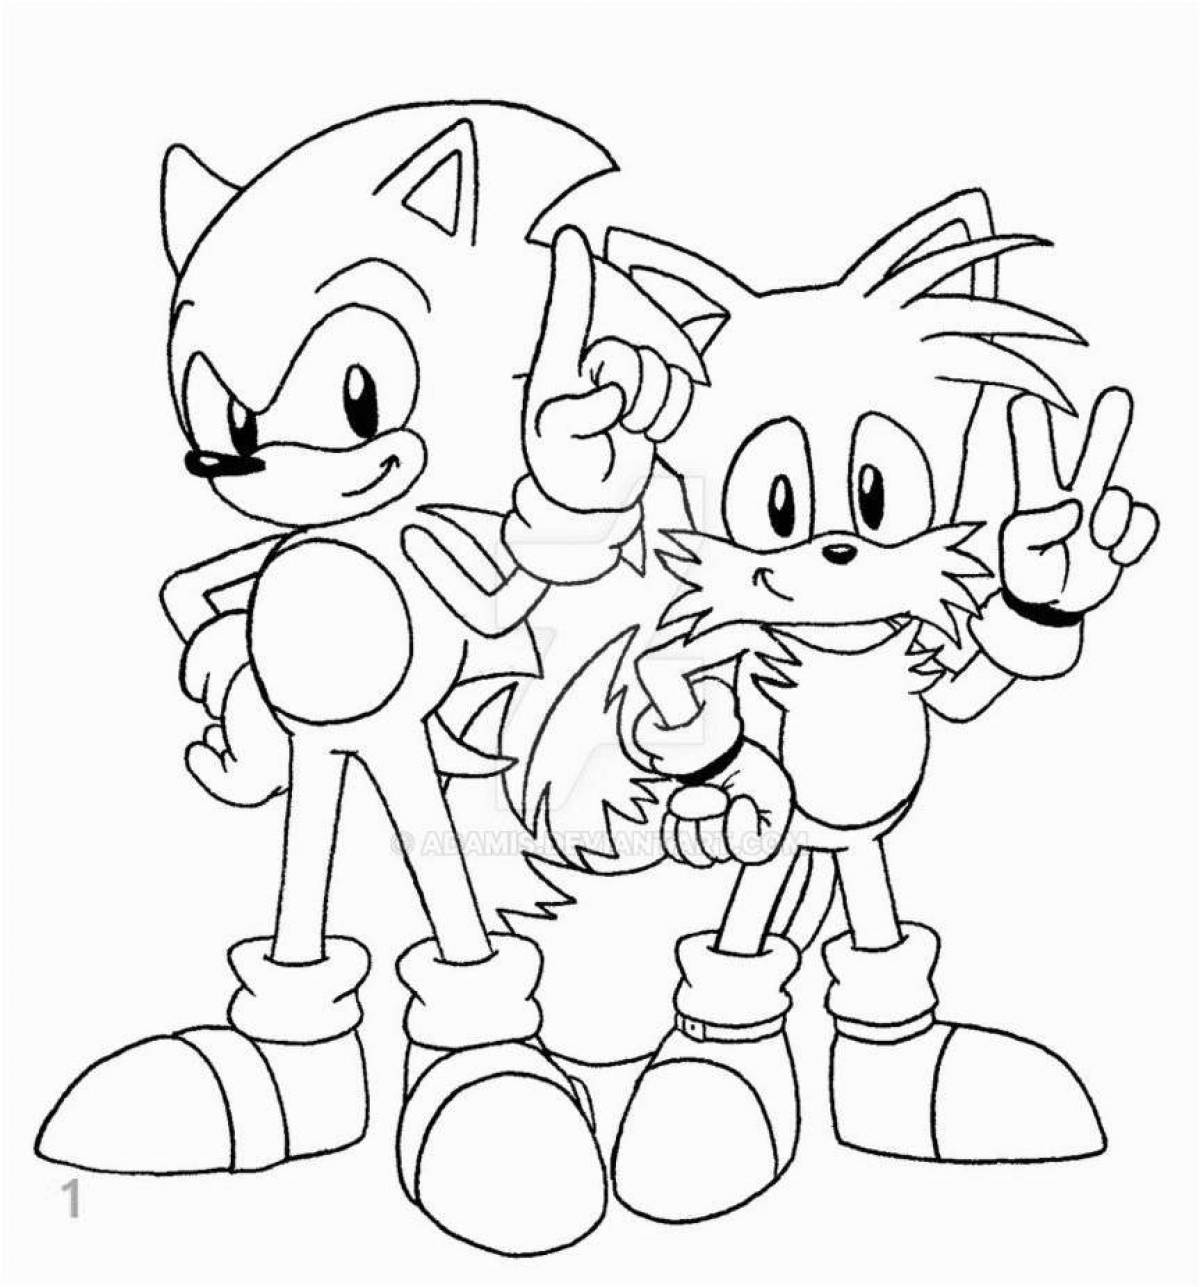 Exquisite sonic and tails coloring page